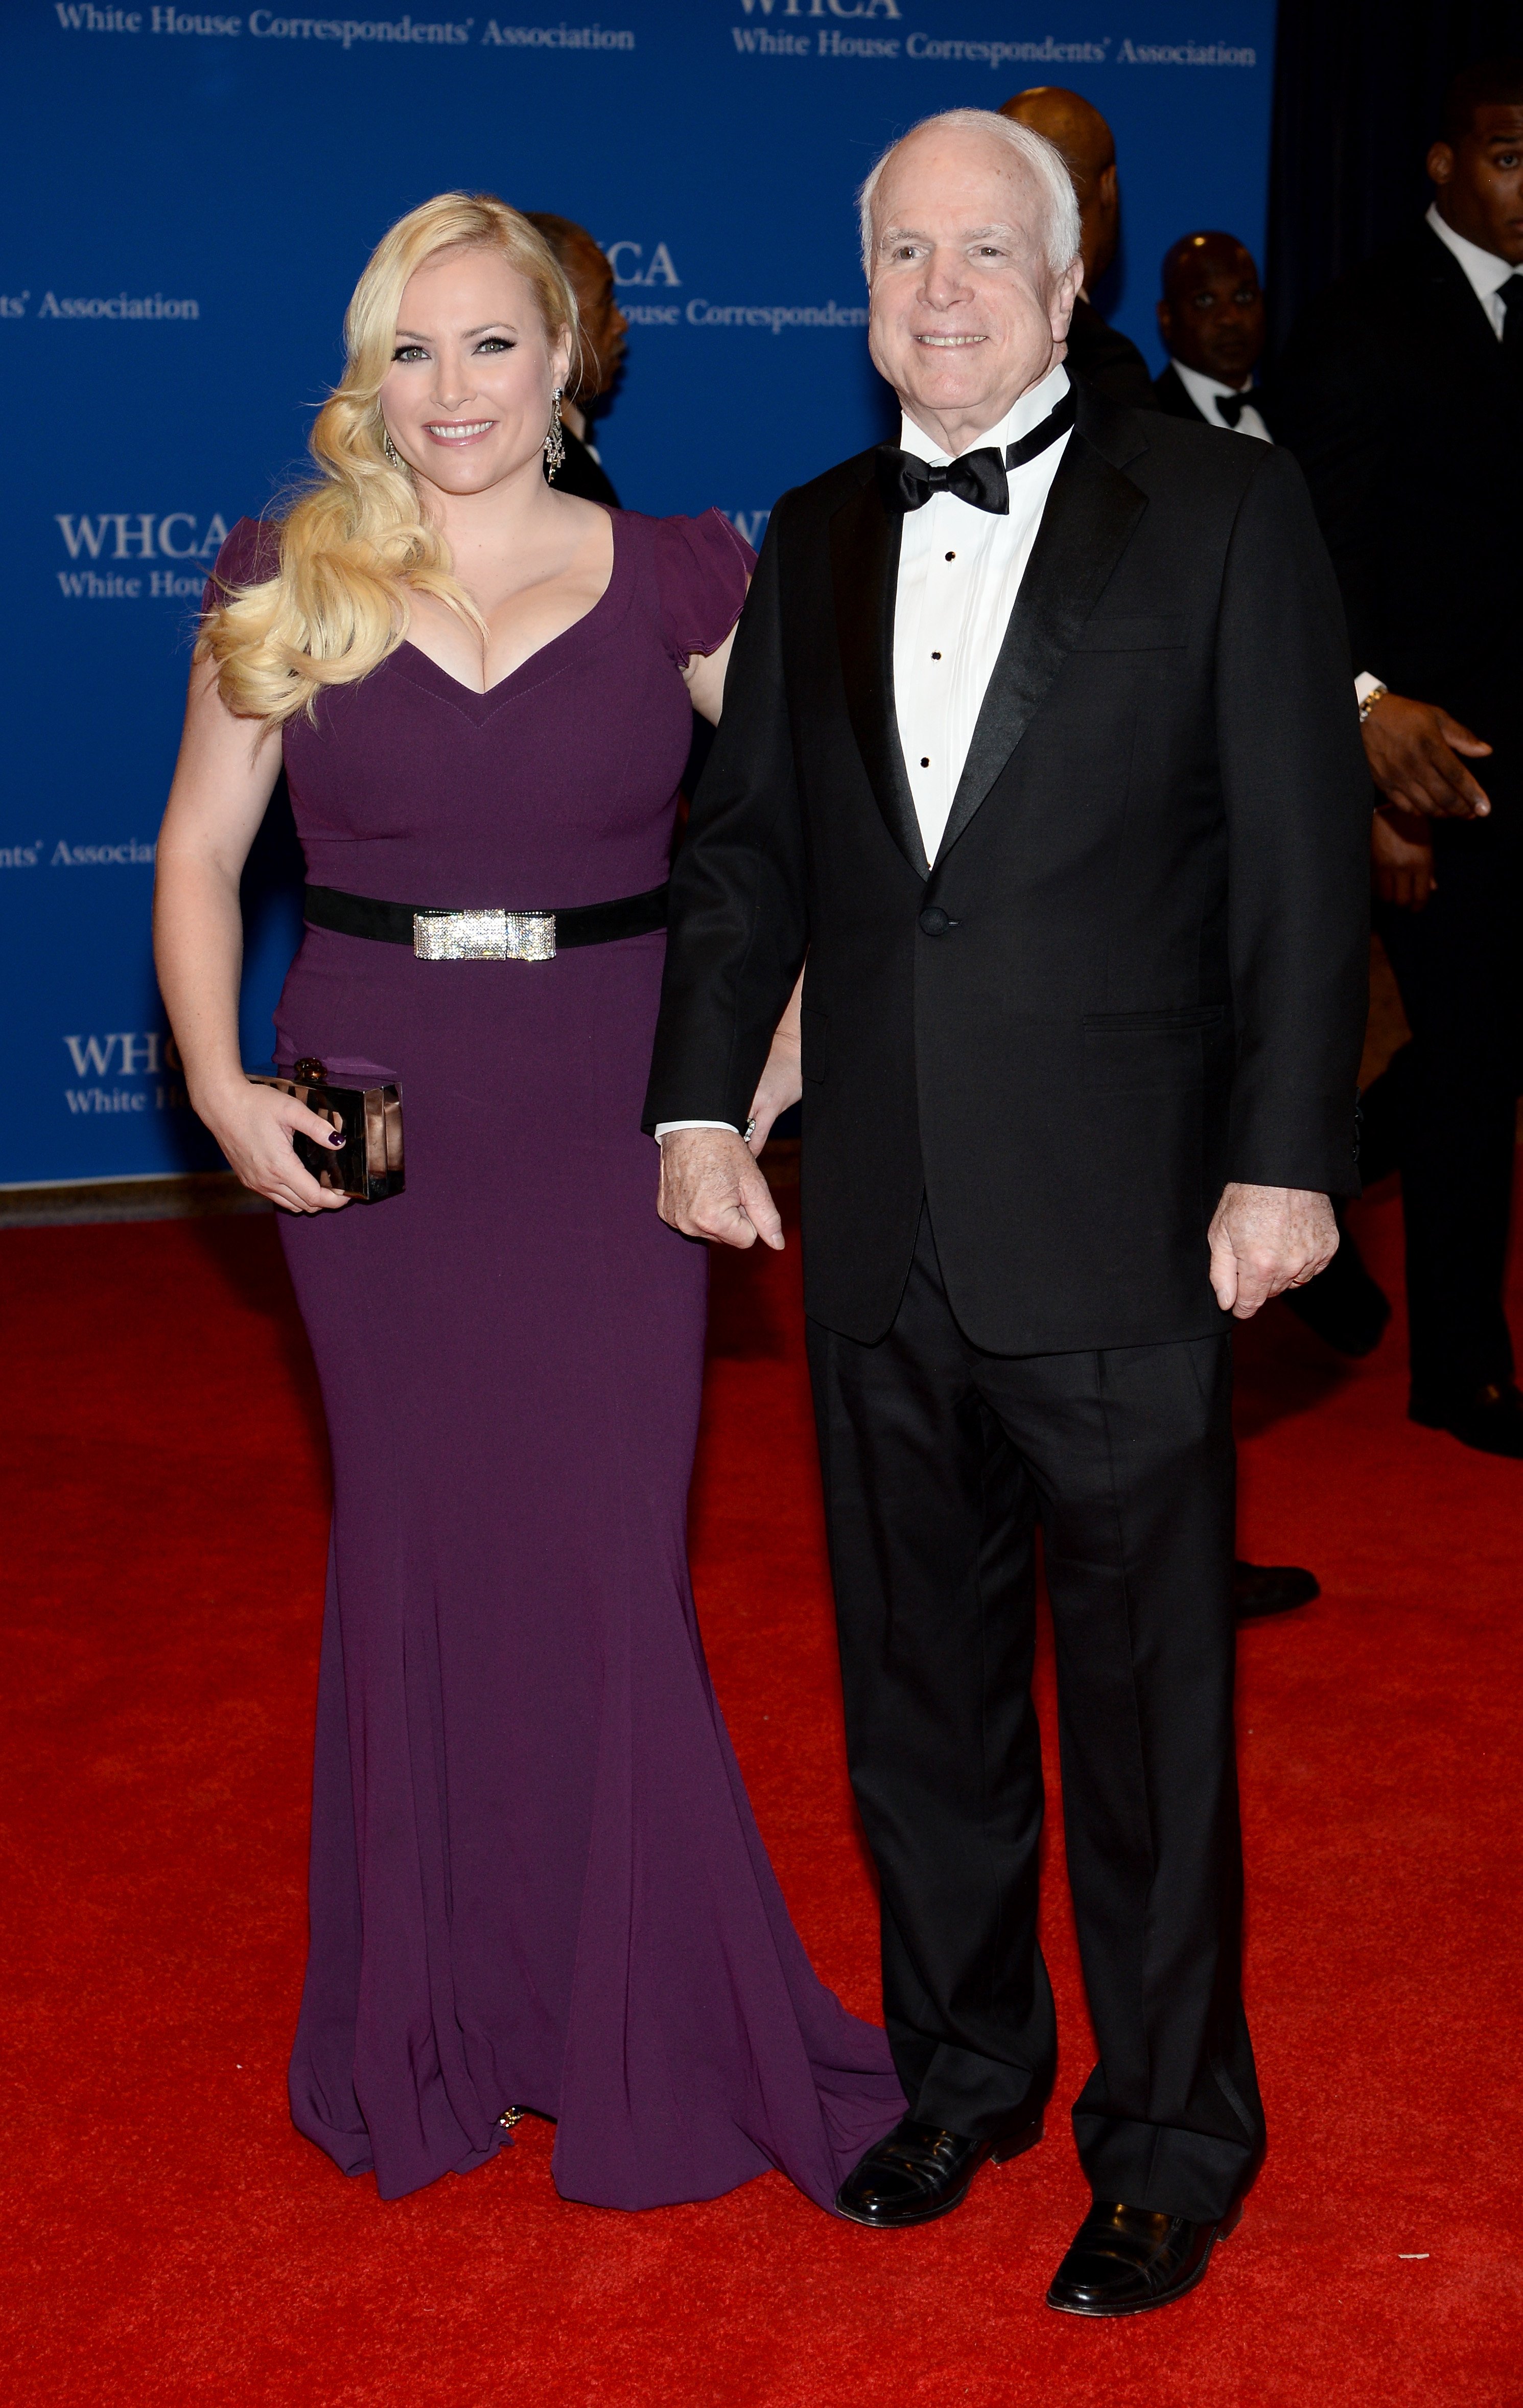 Megan McCain and Senator John McCain at the 100th Annual White House Correspondents' Association Dinner on May 3, 2014. | Photo: Getty Images.